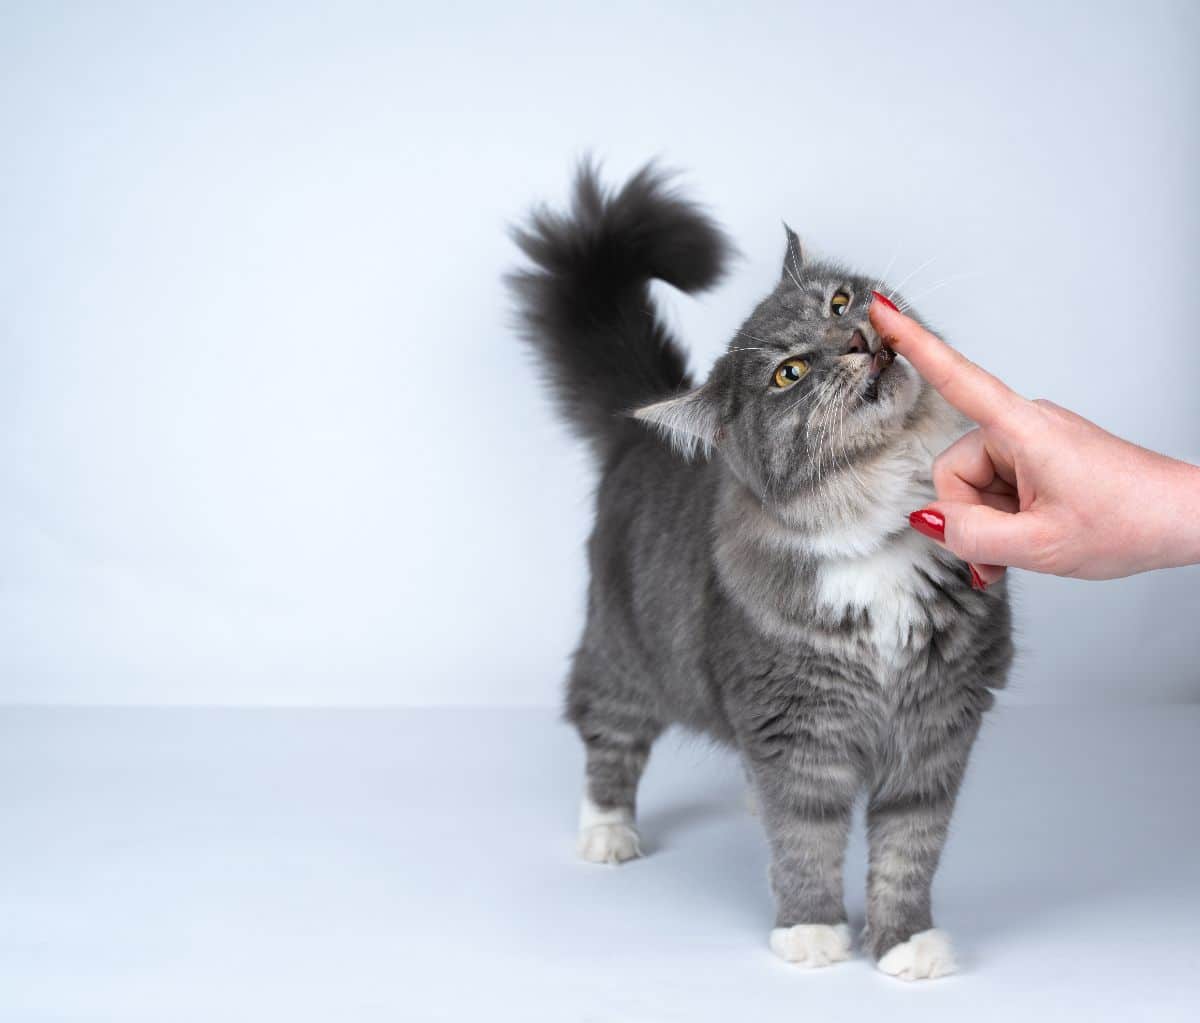 A blue tabby maine coon licking a finger.